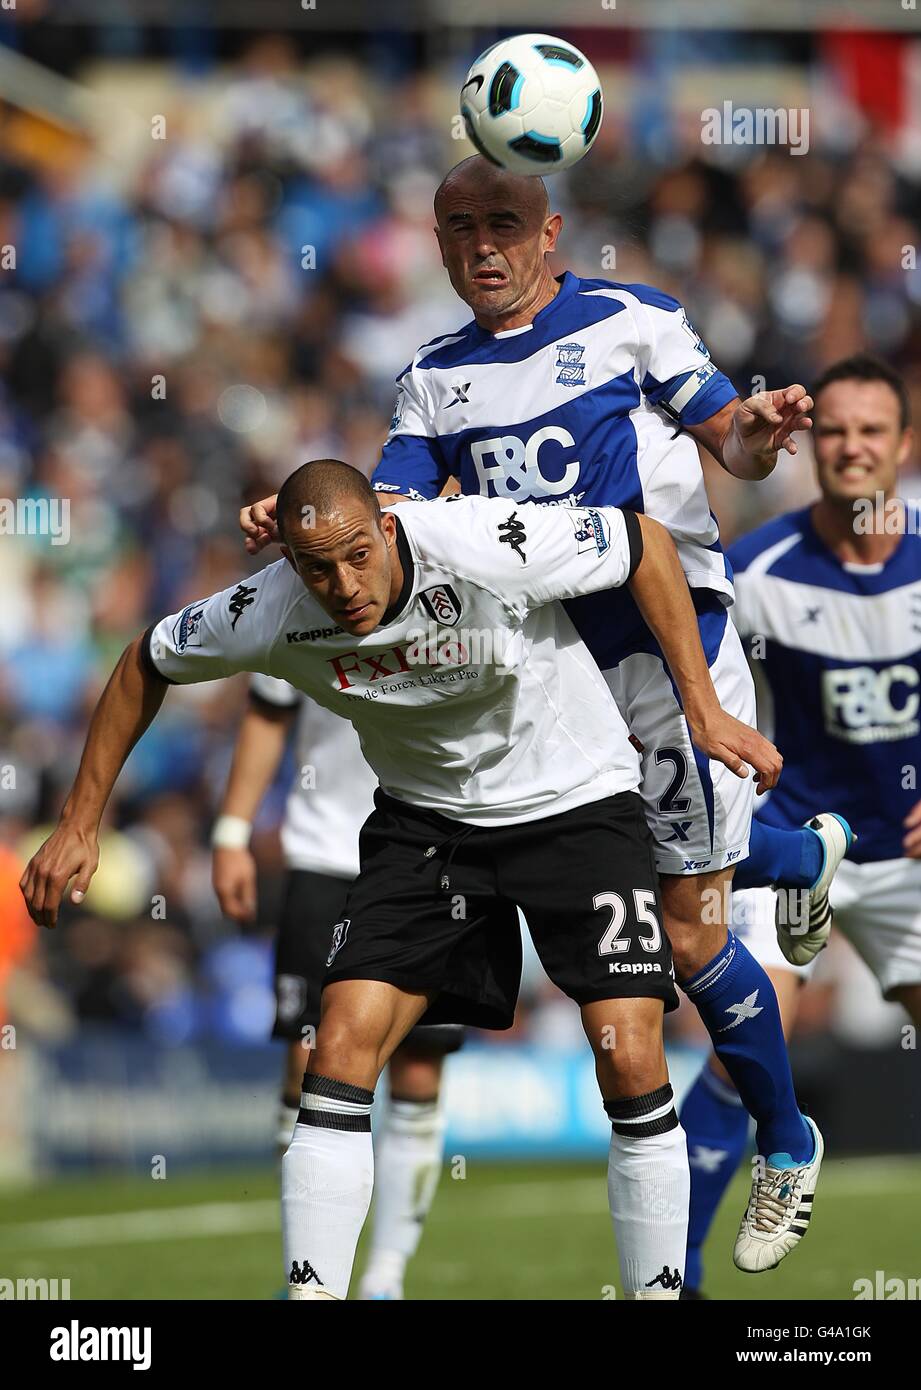 Soccer - Barclays Premier League - Birmingham City v Fulham - St Andrew's. Birmingham City's Stephen Carr (top) and Fulham's Bobby Zamora (bottom) battle for the ball in the air Stock Photo